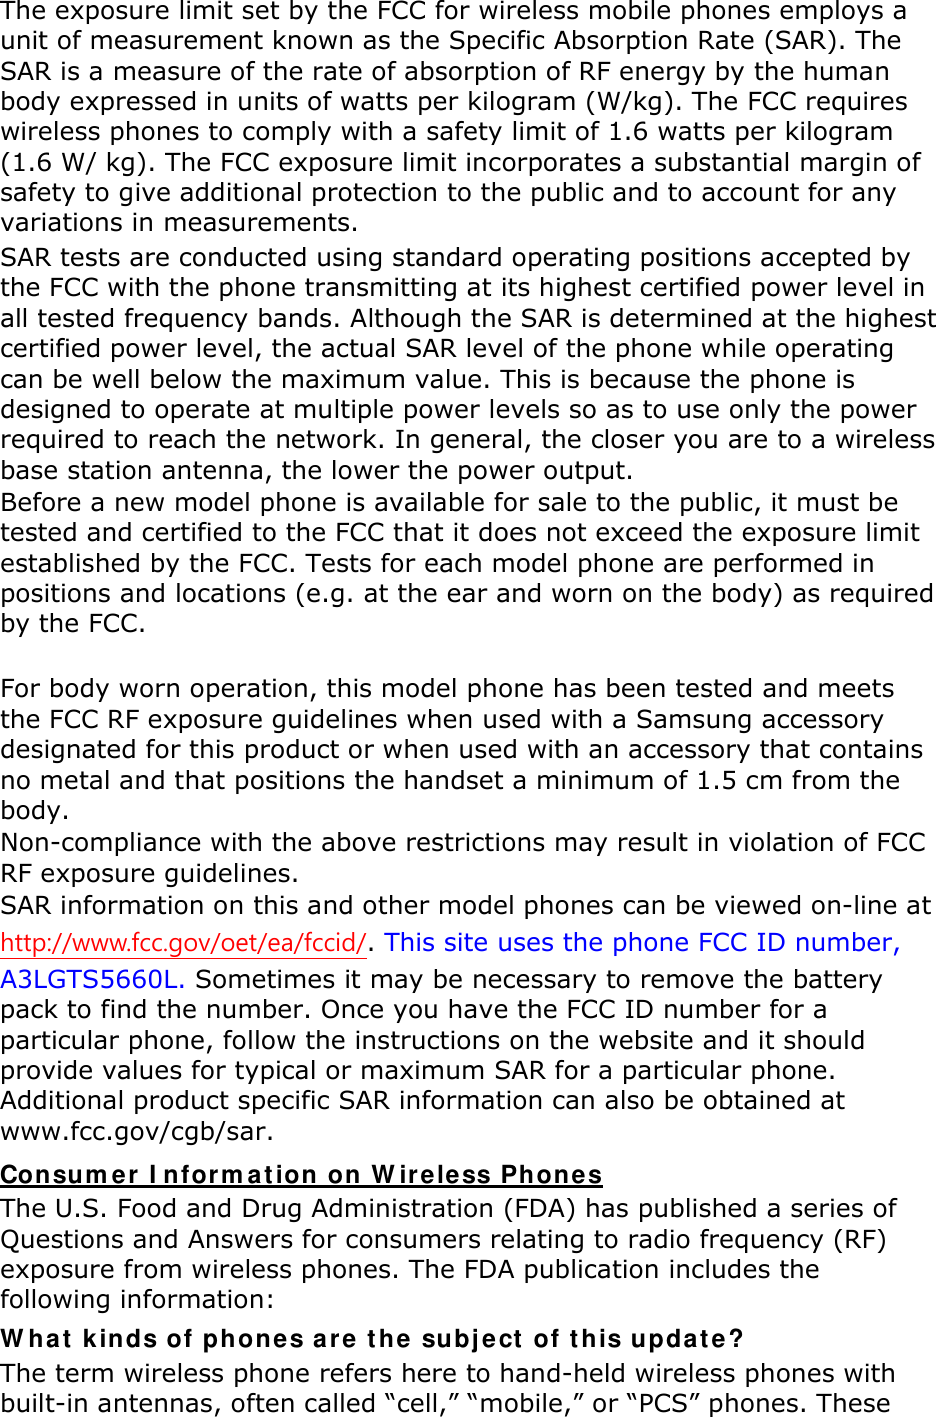 The exposure limit set by the FCC for wireless mobile phones employs a unit of measurement known as the Specific Absorption Rate (SAR). The SAR is a measure of the rate of absorption of RF energy by the human body expressed in units of watts per kilogram (W/kg). The FCC requires wireless phones to comply with a safety limit of 1.6 watts per kilogram (1.6 W/ kg). The FCC exposure limit incorporates a substantial margin of safety to give additional protection to the public and to account for any variations in measurements. SAR tests are conducted using standard operating positions accepted by the FCC with the phone transmitting at its highest certified power level in all tested frequency bands. Although the SAR is determined at the highest certified power level, the actual SAR level of the phone while operating can be well below the maximum value. This is because the phone is designed to operate at multiple power levels so as to use only the power required to reach the network. In general, the closer you are to a wireless base station antenna, the lower the power output. Before a new model phone is available for sale to the public, it must be tested and certified to the FCC that it does not exceed the exposure limit established by the FCC. Tests for each model phone are performed in positions and locations (e.g. at the ear and worn on the body) as required by the FCC.      For body worn operation, this model phone has been tested and meets the FCC RF exposure guidelines when used with a Samsung accessory designated for this product or when used with an accessory that contains no metal and that positions the handset a minimum of 1.5 cm from the body.   Non-compliance with the above restrictions may result in violation of FCC RF exposure guidelines. SAR information on this and other model phones can be viewed on-line at http://www.fcc.gov/oet/ea/fccid/. This site uses the phone FCC ID number, A3LGTS5660L. Sometimes it may be necessary to remove the battery pack to find the number. Once you have the FCC ID number for a particular phone, follow the instructions on the website and it should provide values for typical or maximum SAR for a particular phone. Additional product specific SAR information can also be obtained at www.fcc.gov/cgb/sar. Consumer Information on Wireless Phones The U.S. Food and Drug Administration (FDA) has published a series of Questions and Answers for consumers relating to radio frequency (RF) exposure from wireless phones. The FDA publication includes the following information: What kinds of phones are the subject of this update? The term wireless phone refers here to hand-held wireless phones with built-in antennas, often called “cell,” “mobile,” or “PCS” phones. These 